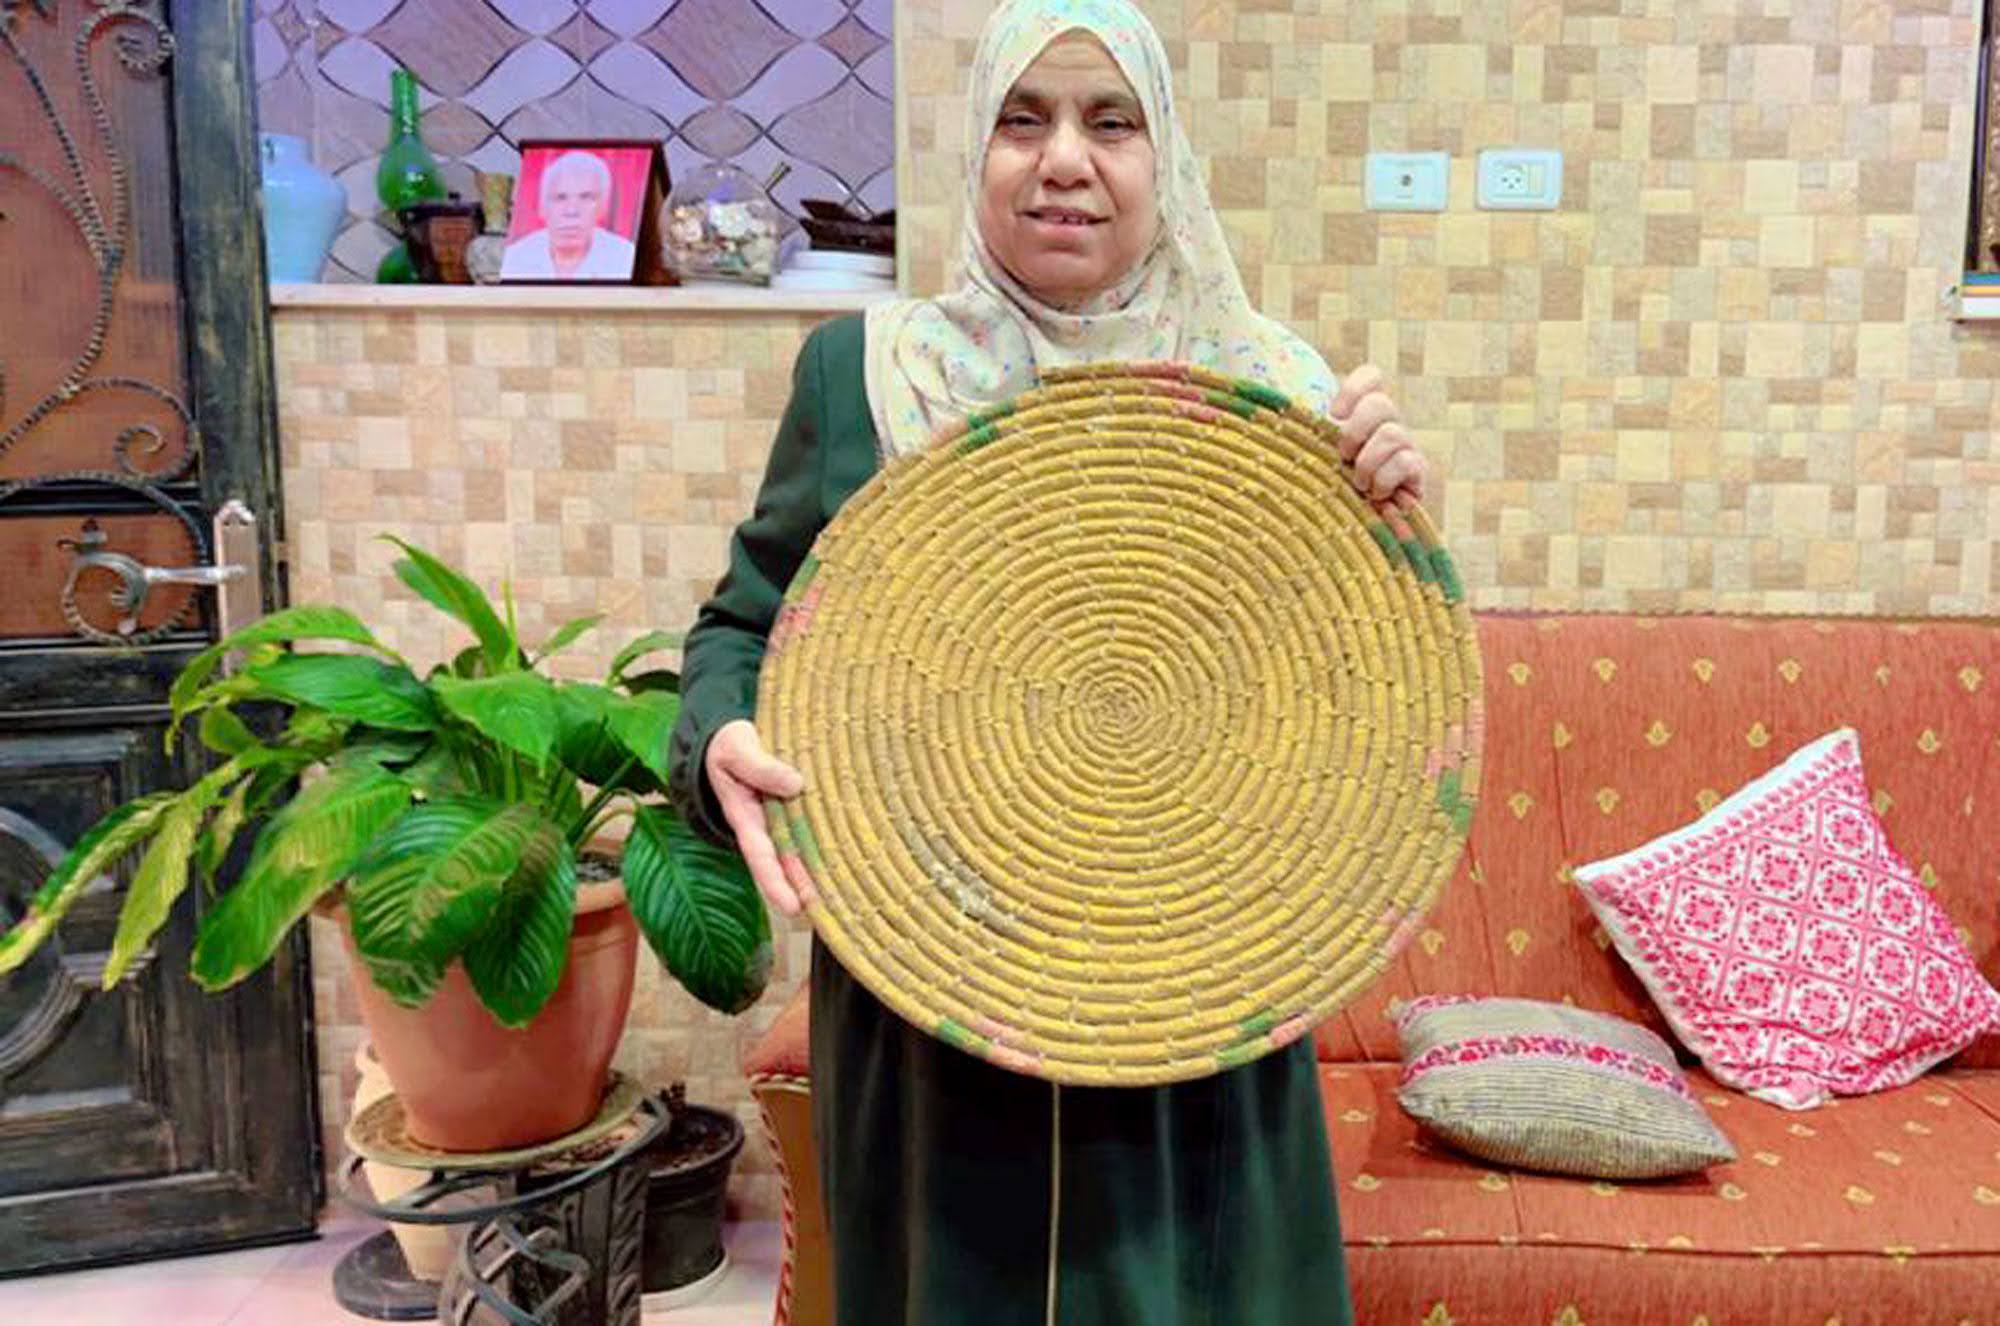 This is Sabah's grandmother's handwoven tray made of wheat straw. This was handmade by her grandmother in the 1940’s  when she was a young girl living in her village before the 1948 war.